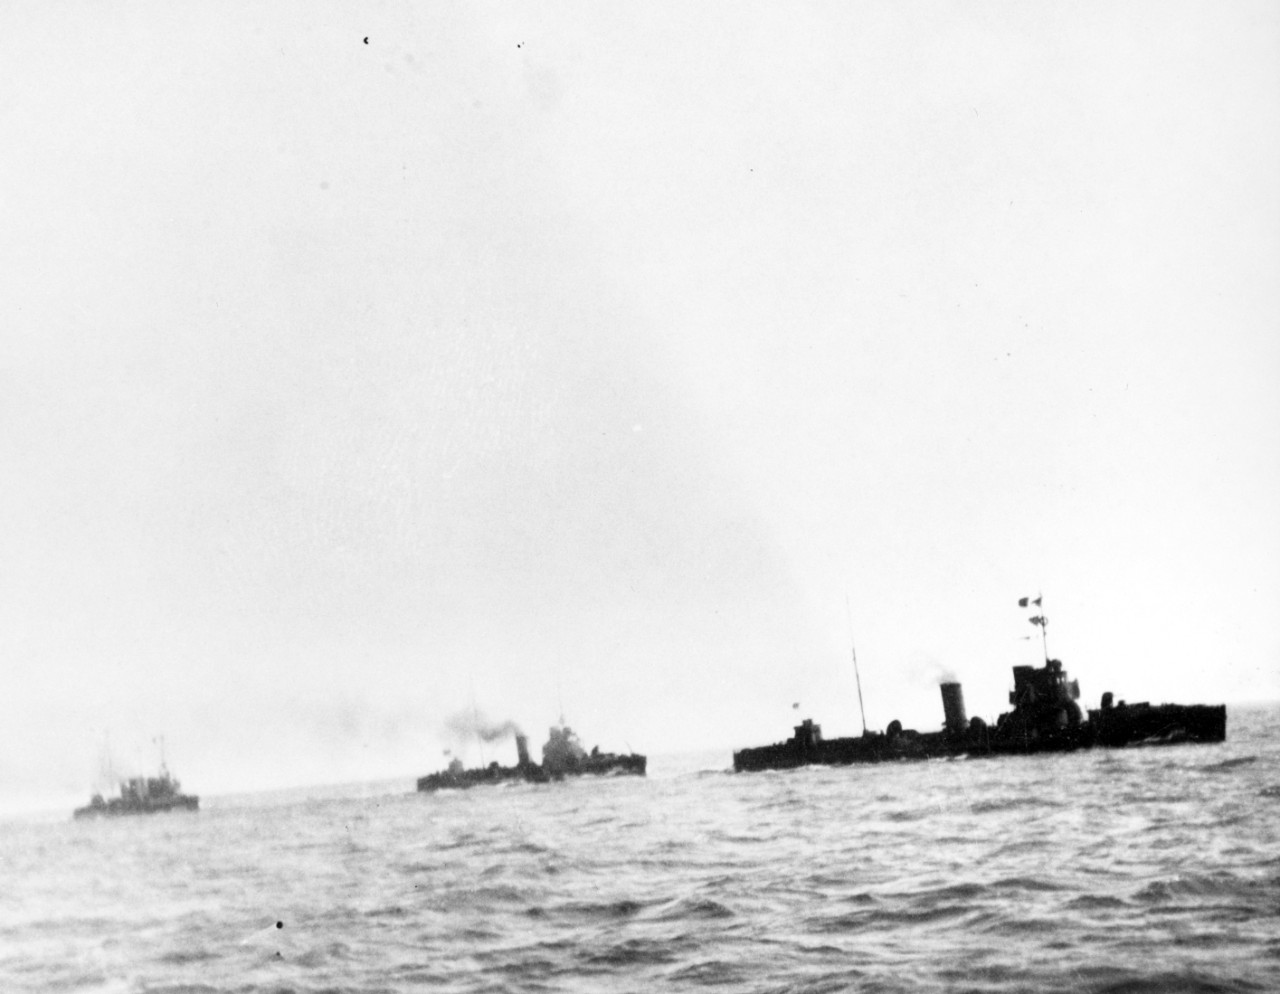 German destroyers at sea about 1915-1916.